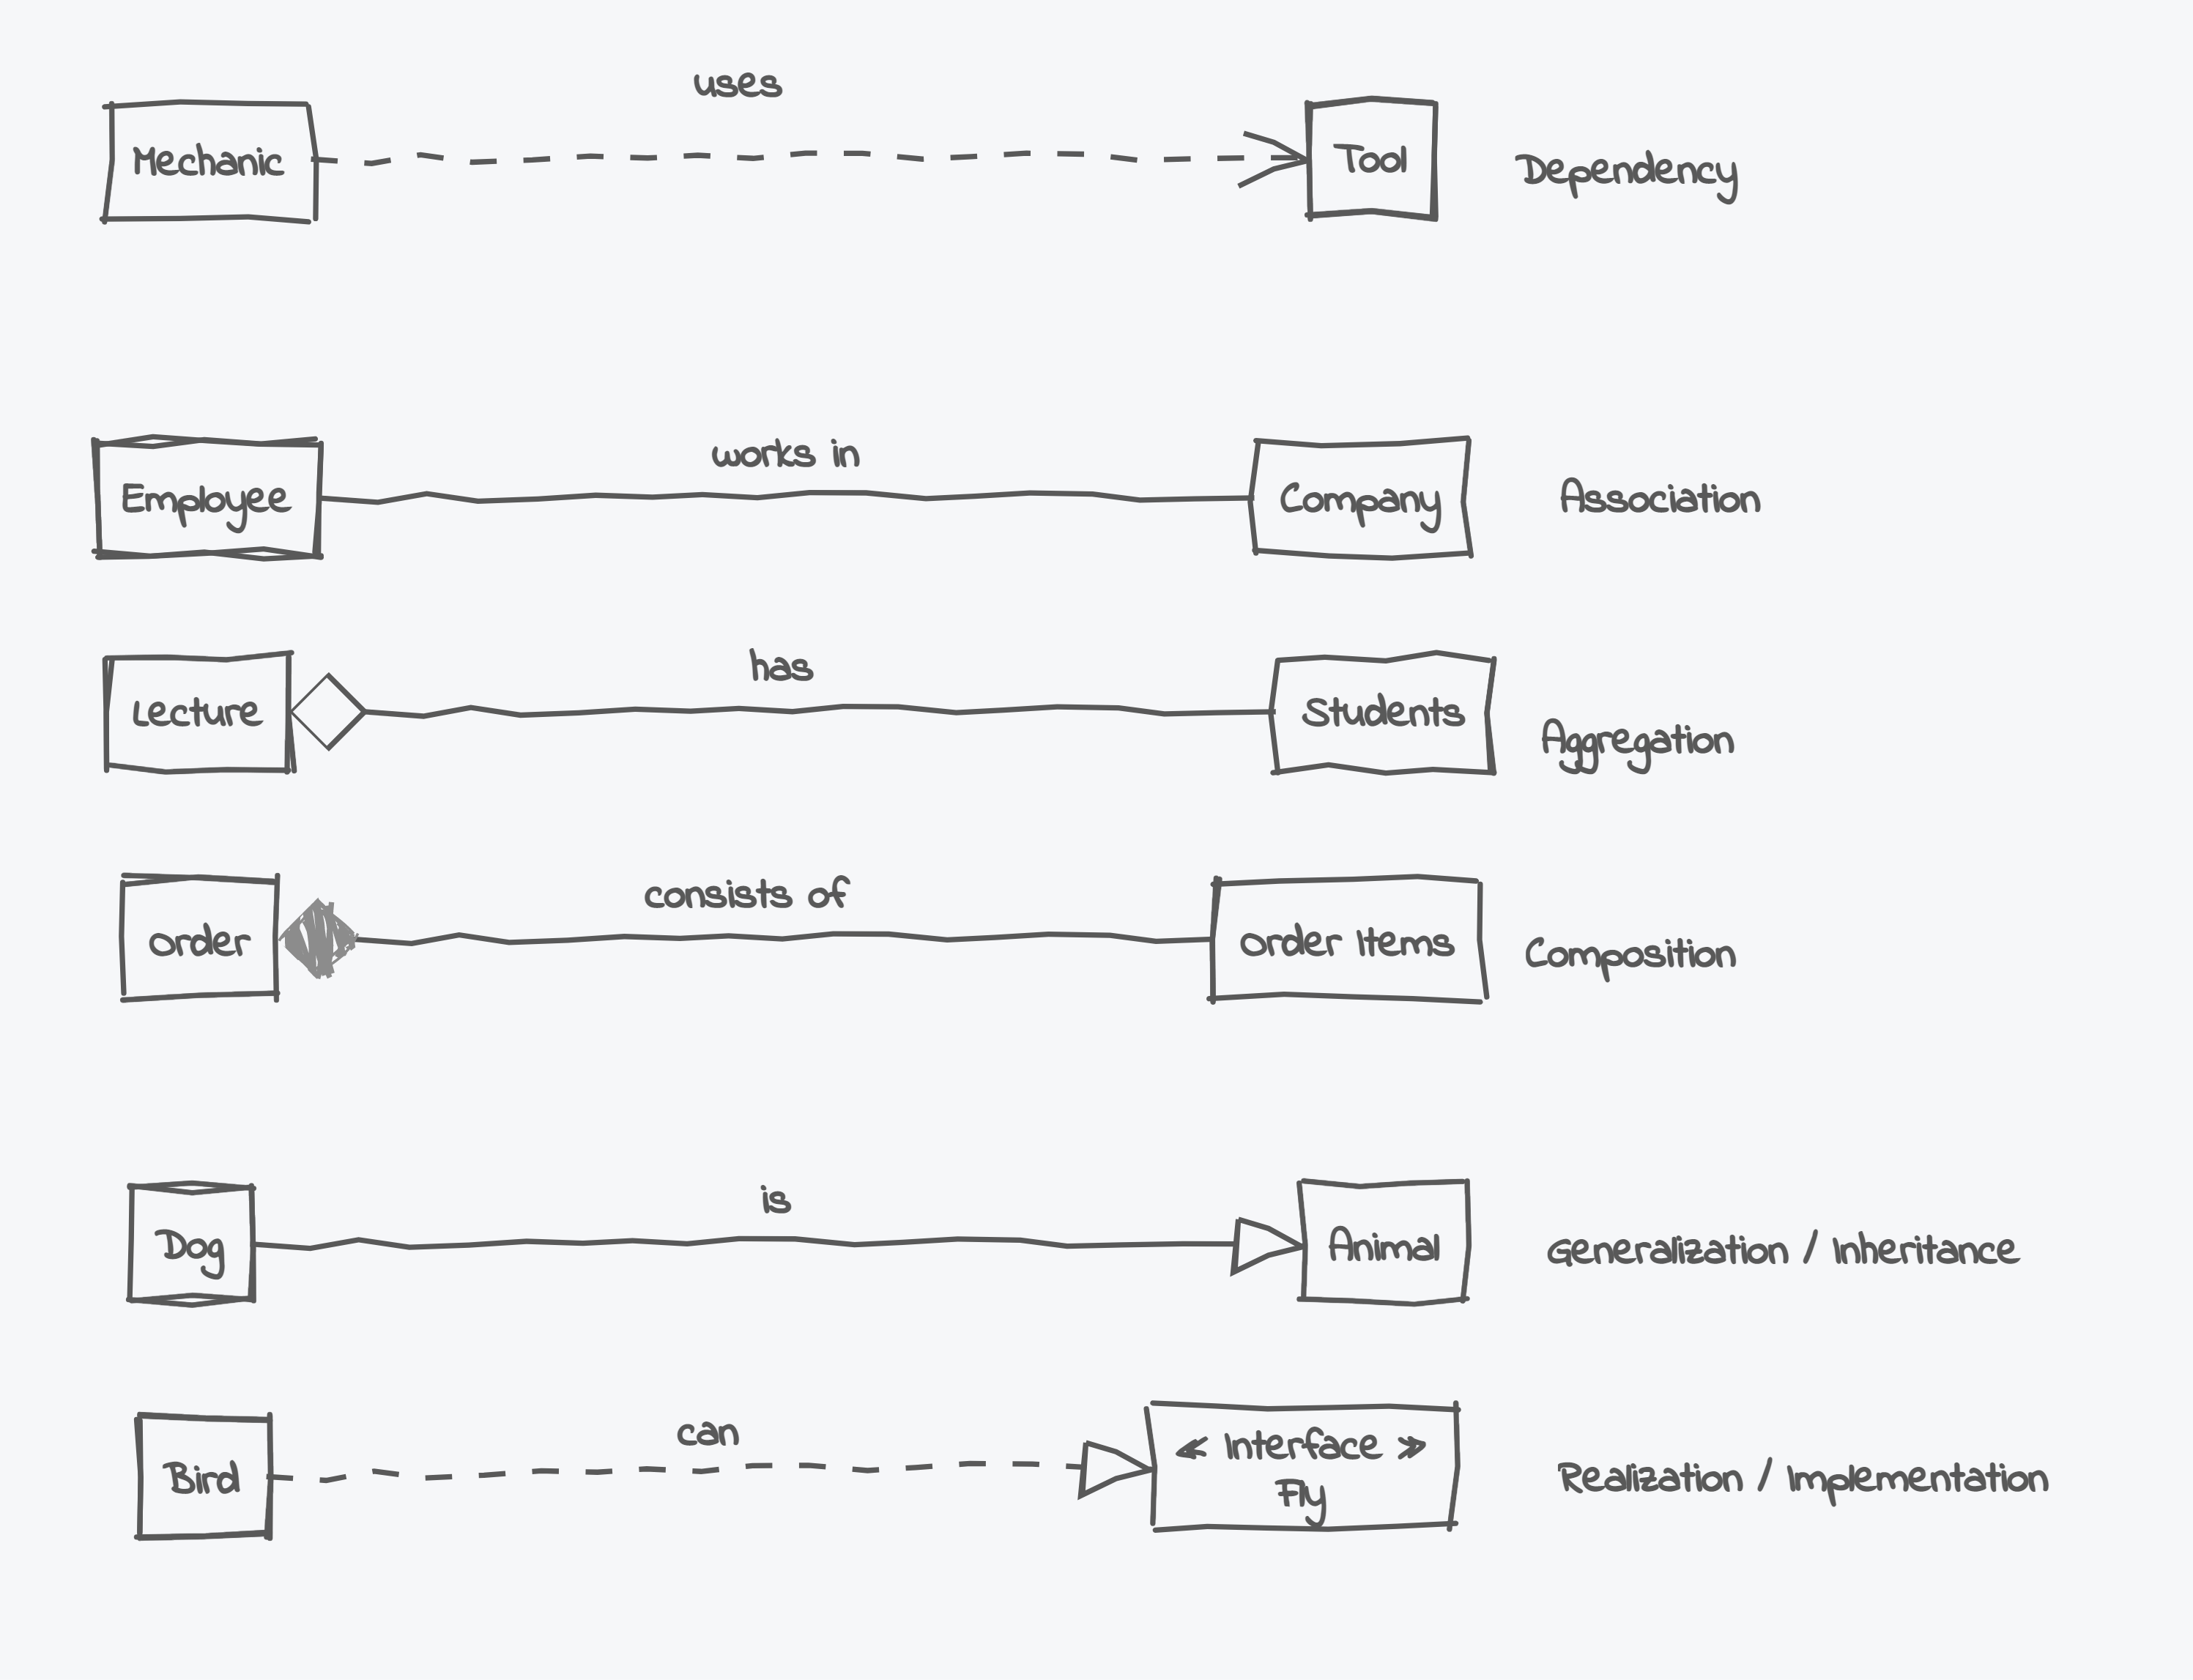 UML Relations: Assocation, Aggregation, Composition, Dependency, Inheritance and Implementaiton